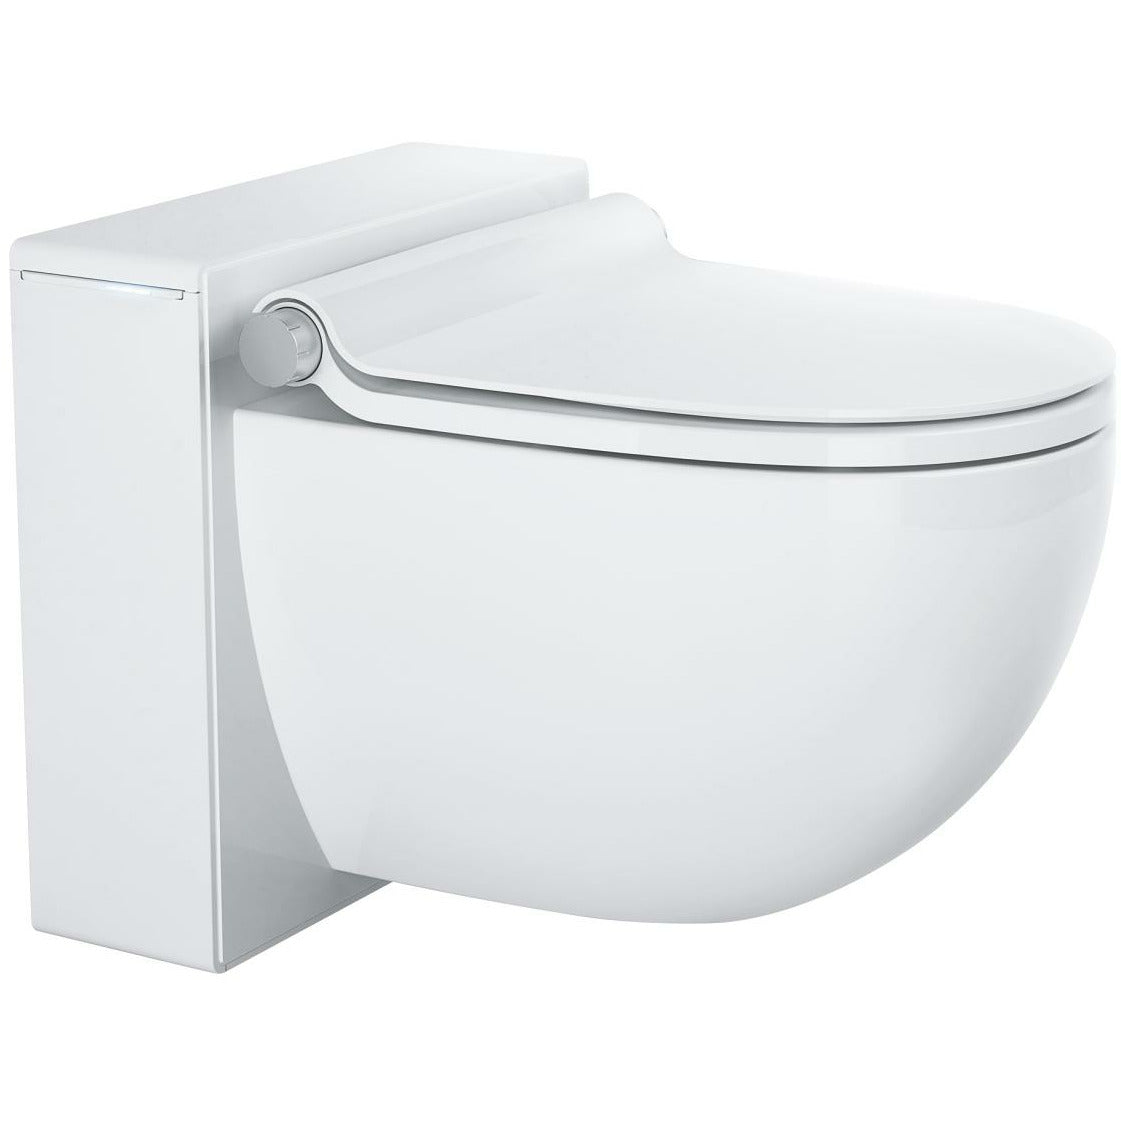 Grohe Sensia IGS Shower toilet complete system for concealed flushing cisterns, wall-hung - Letta London - Japanese Toilets